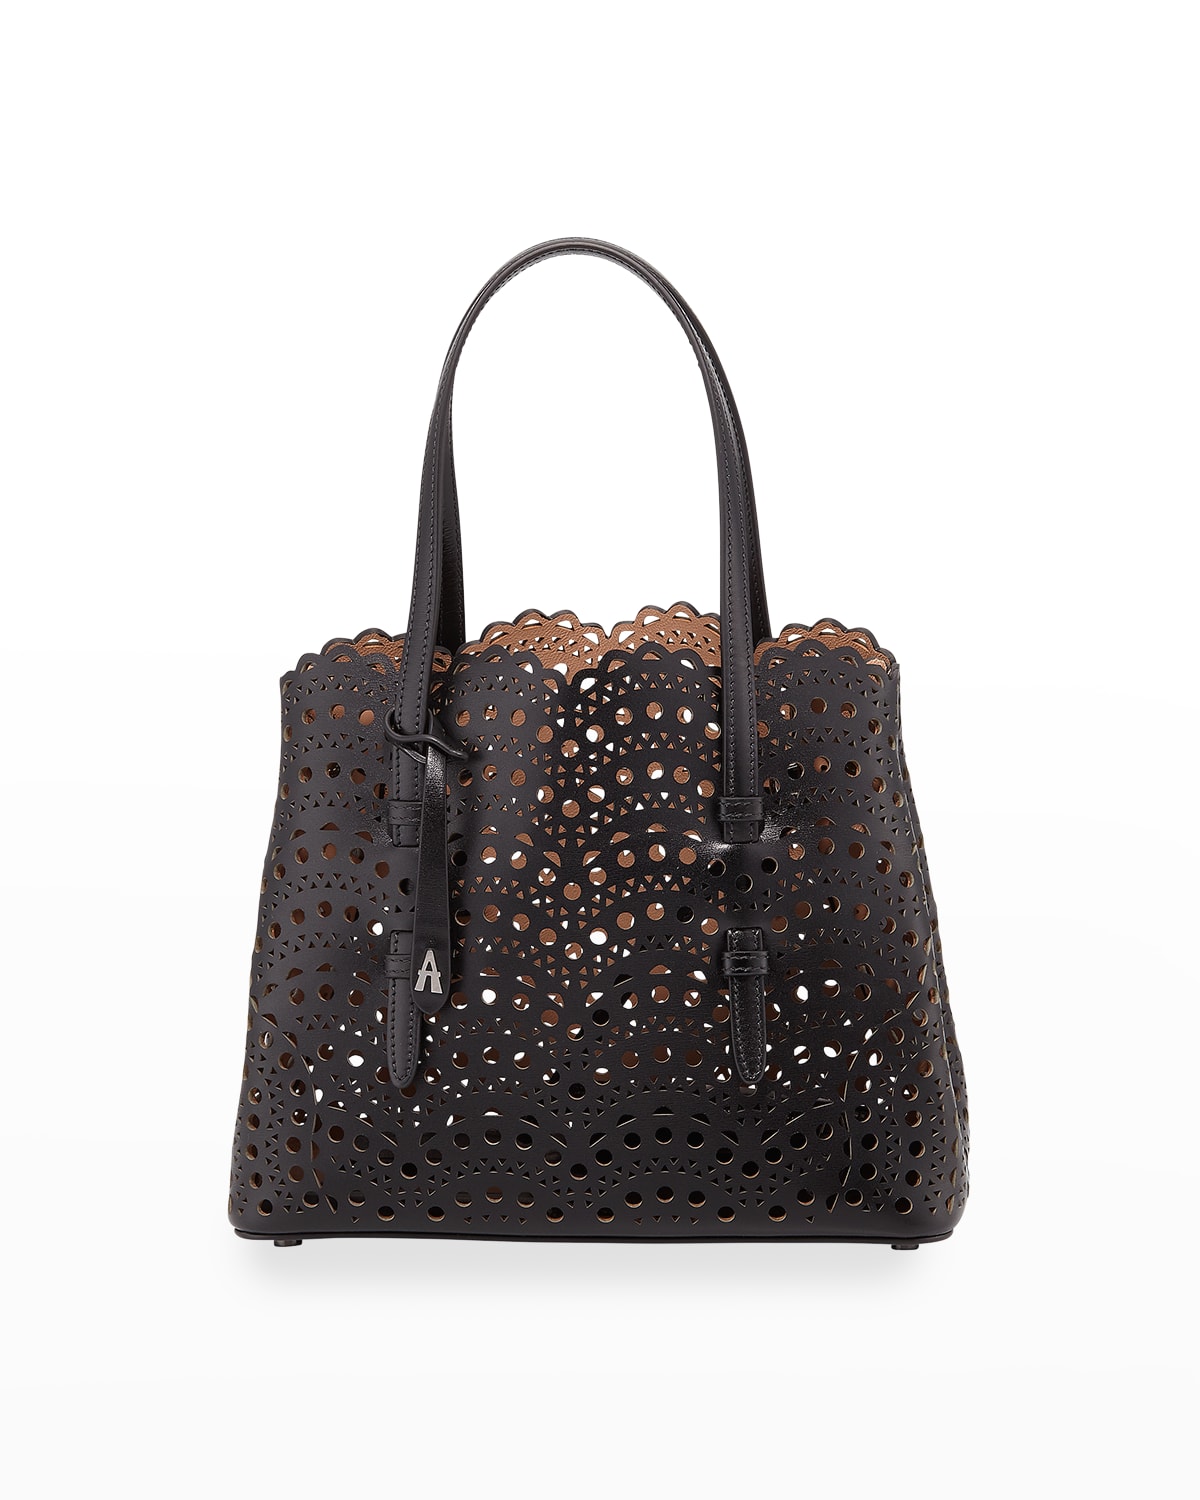 Mina 25 Tote Bag in Vienne Wave Perforated Leather